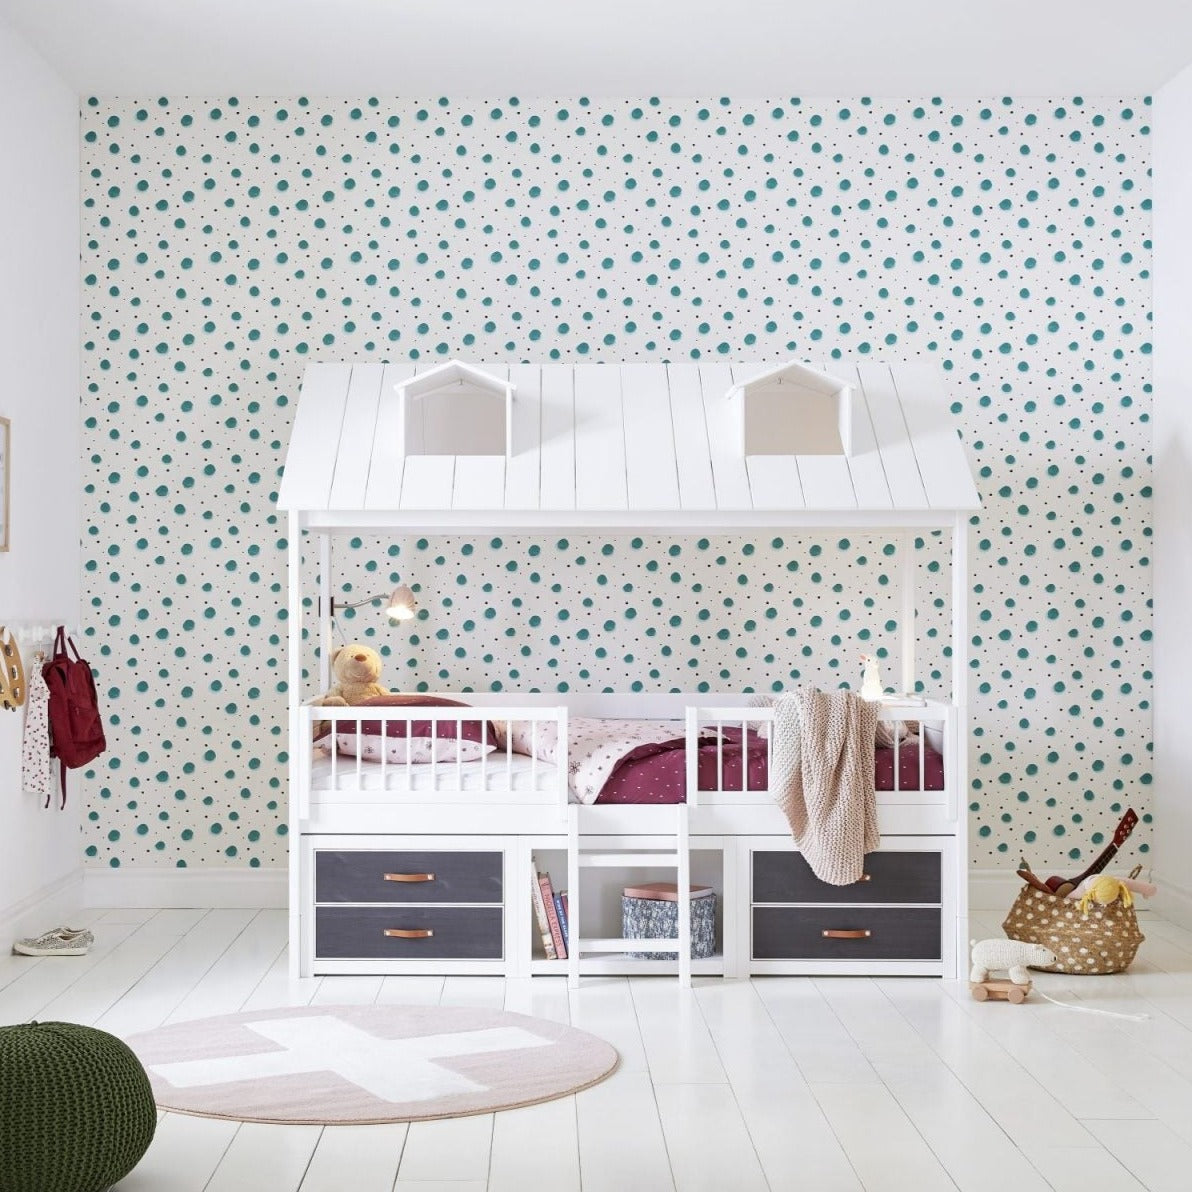 Beach hut bed with storage by Lifetime Kids